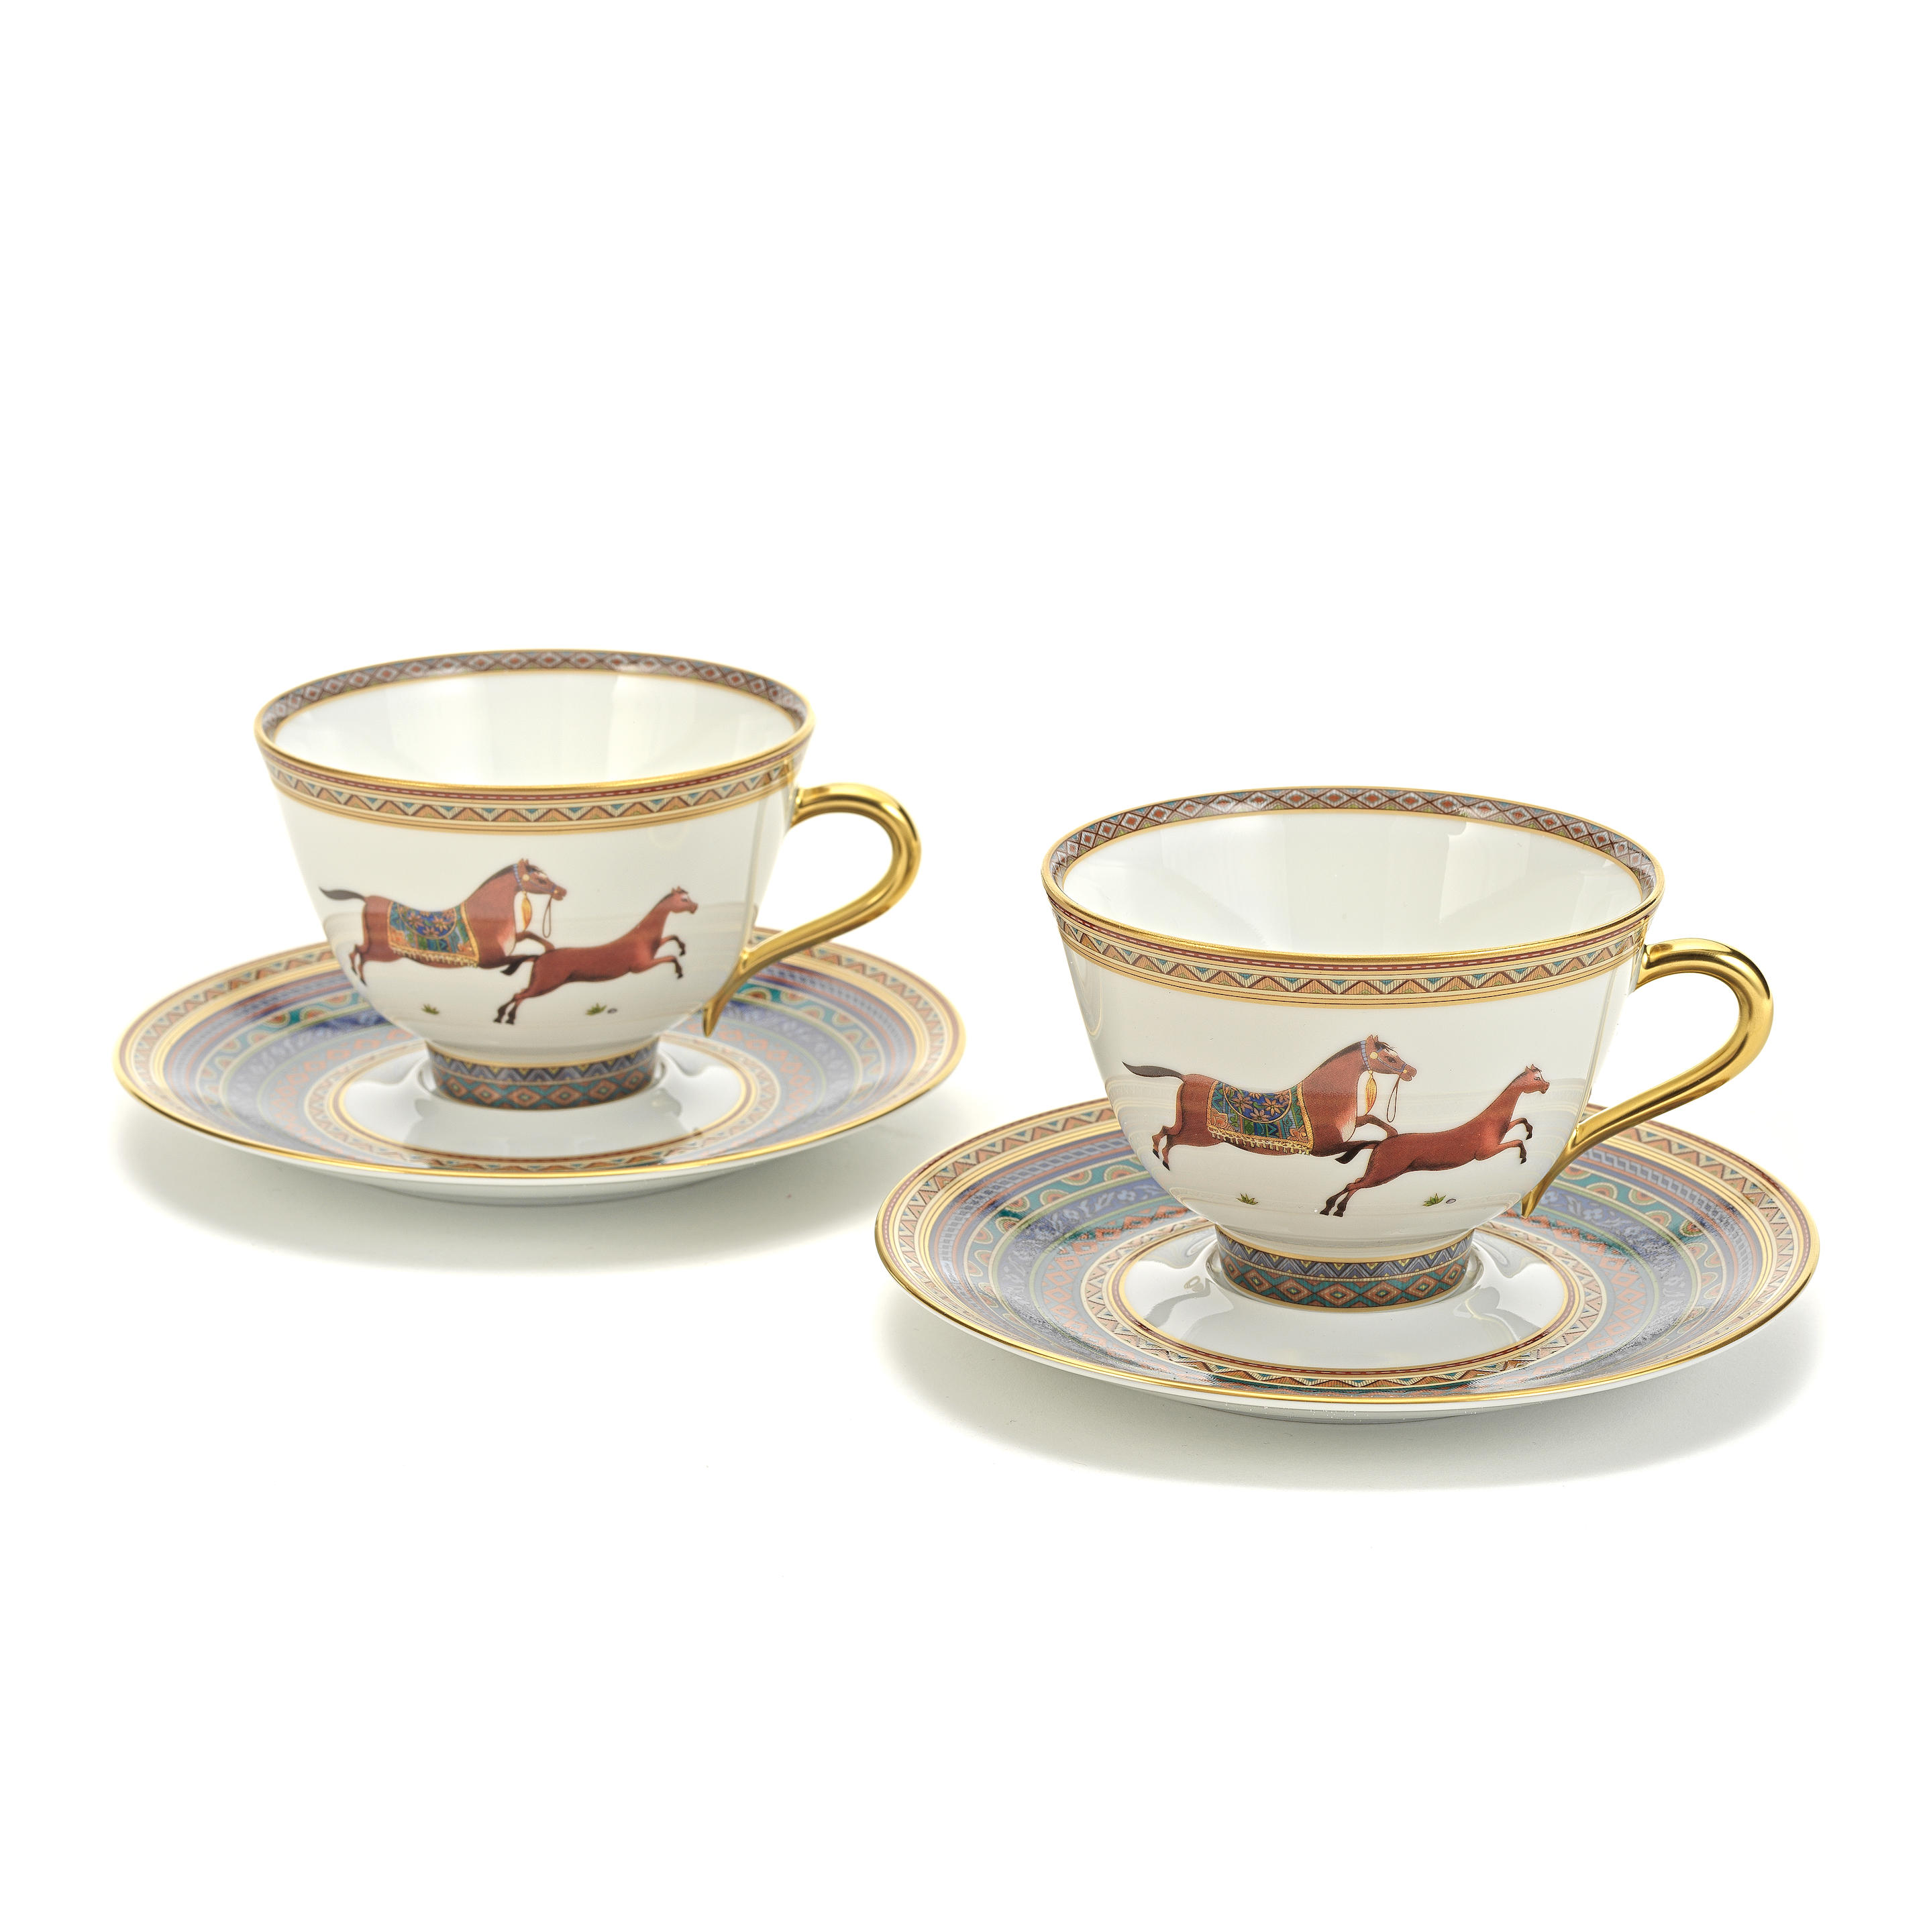 Cheval d'Orient tea cup and saucer n°3